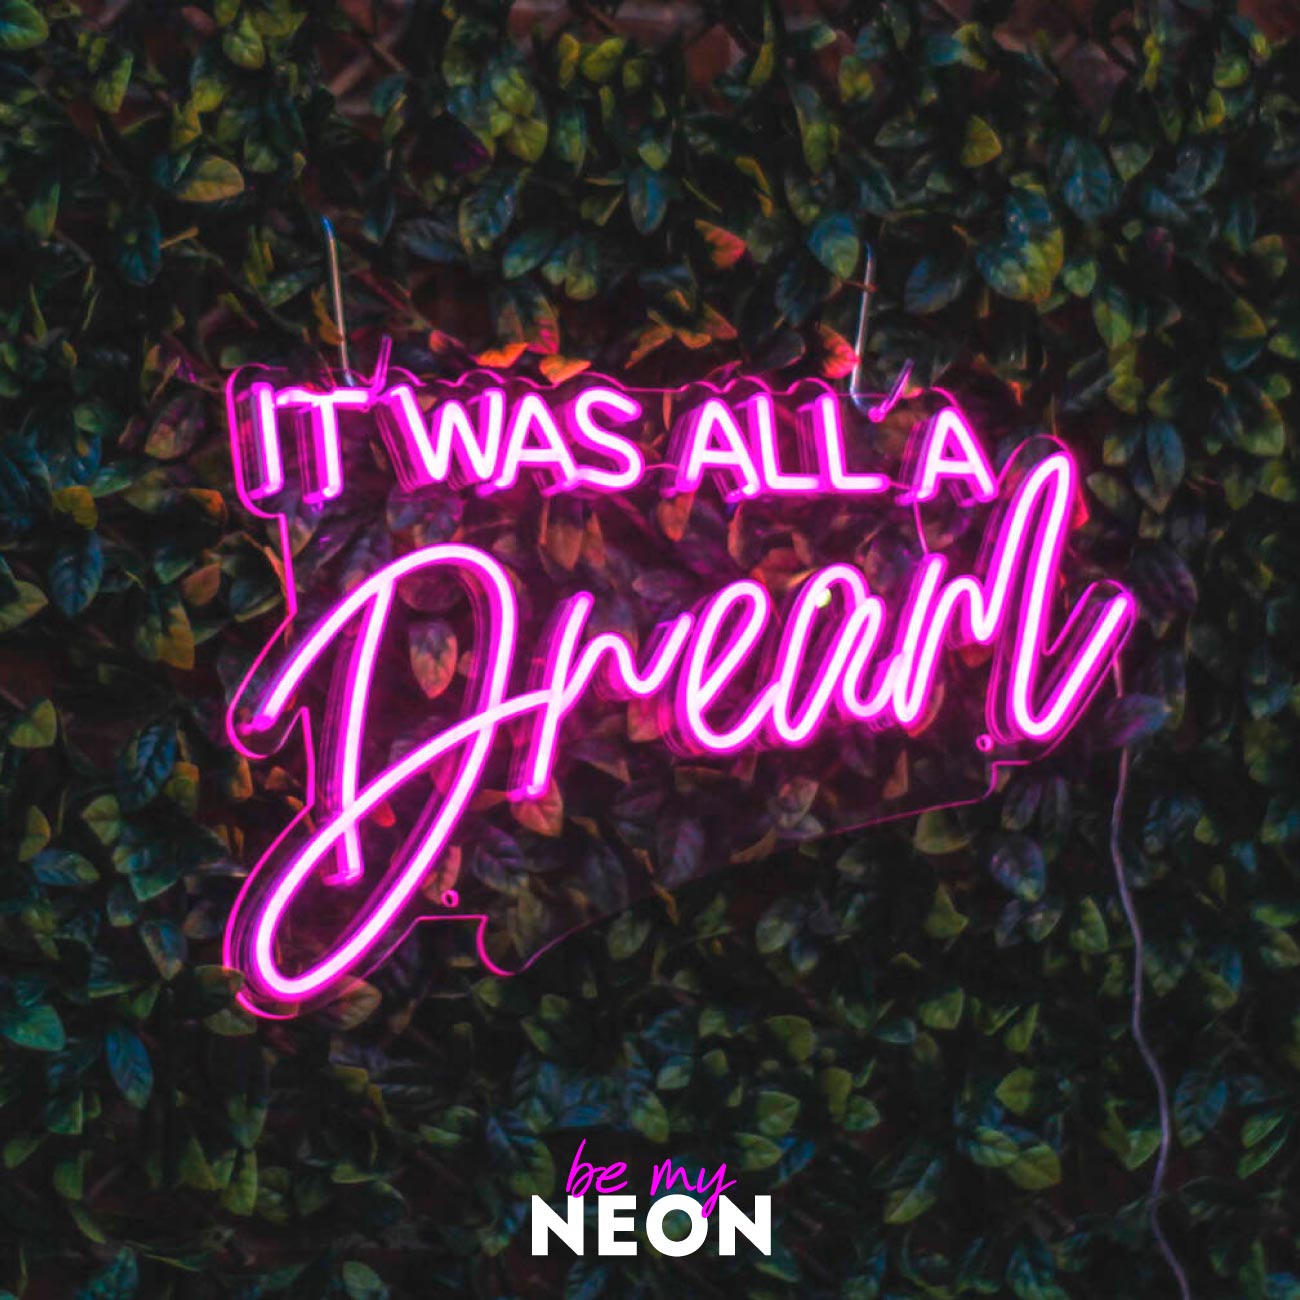 "IT WAS ALL A DREAM" LED Neonschild